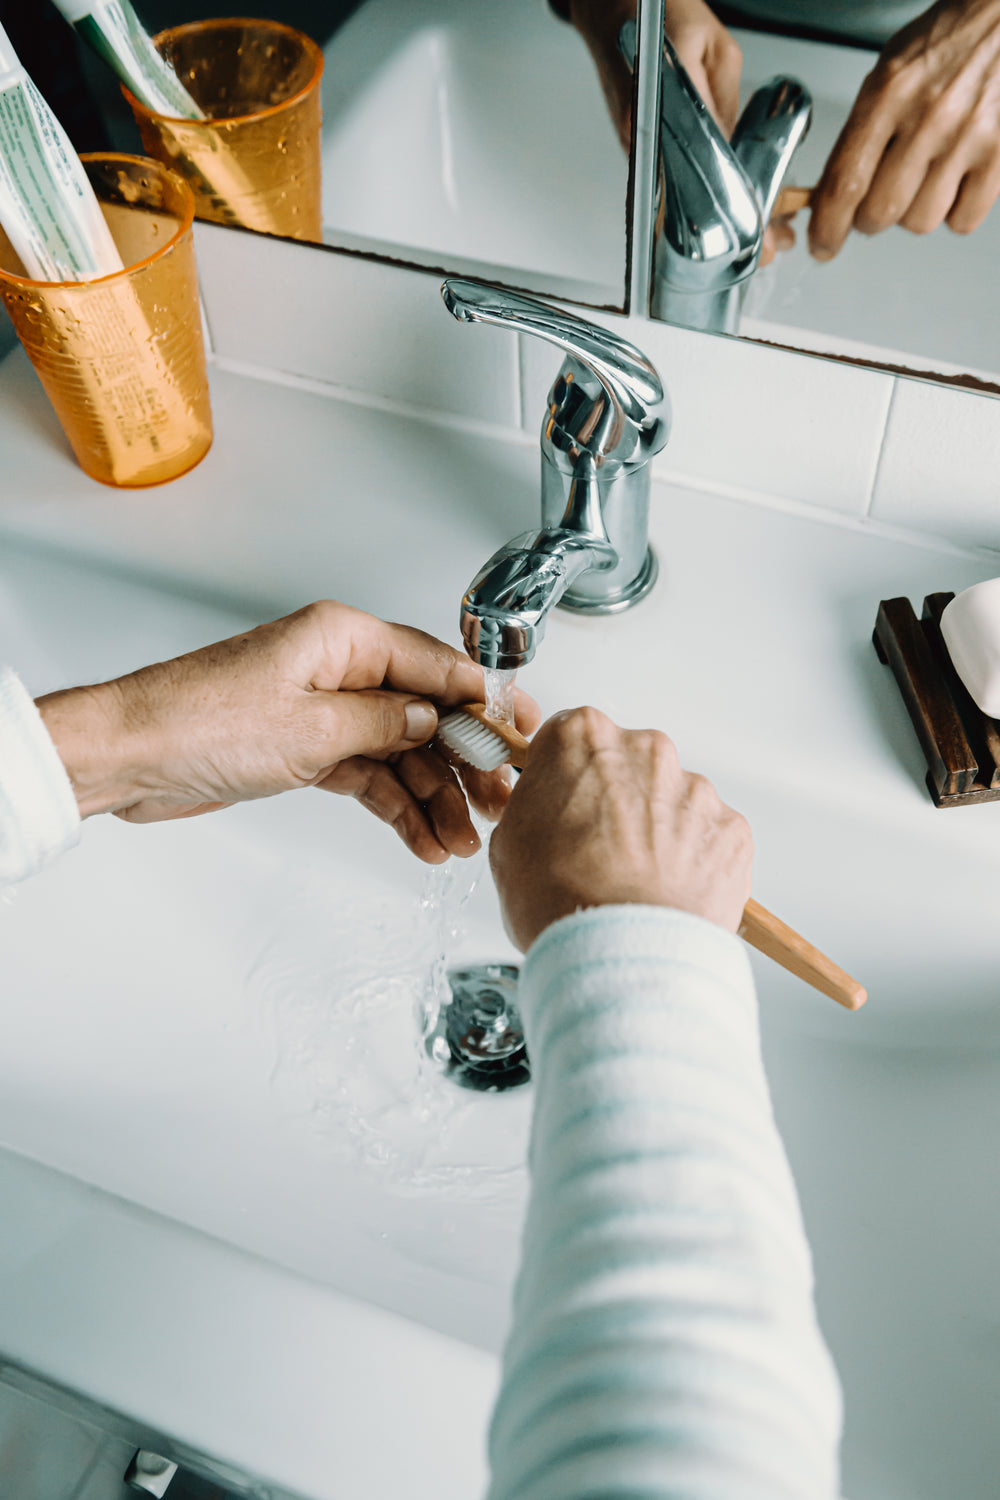 hands rinse out a wooden toothbrush in a white sink